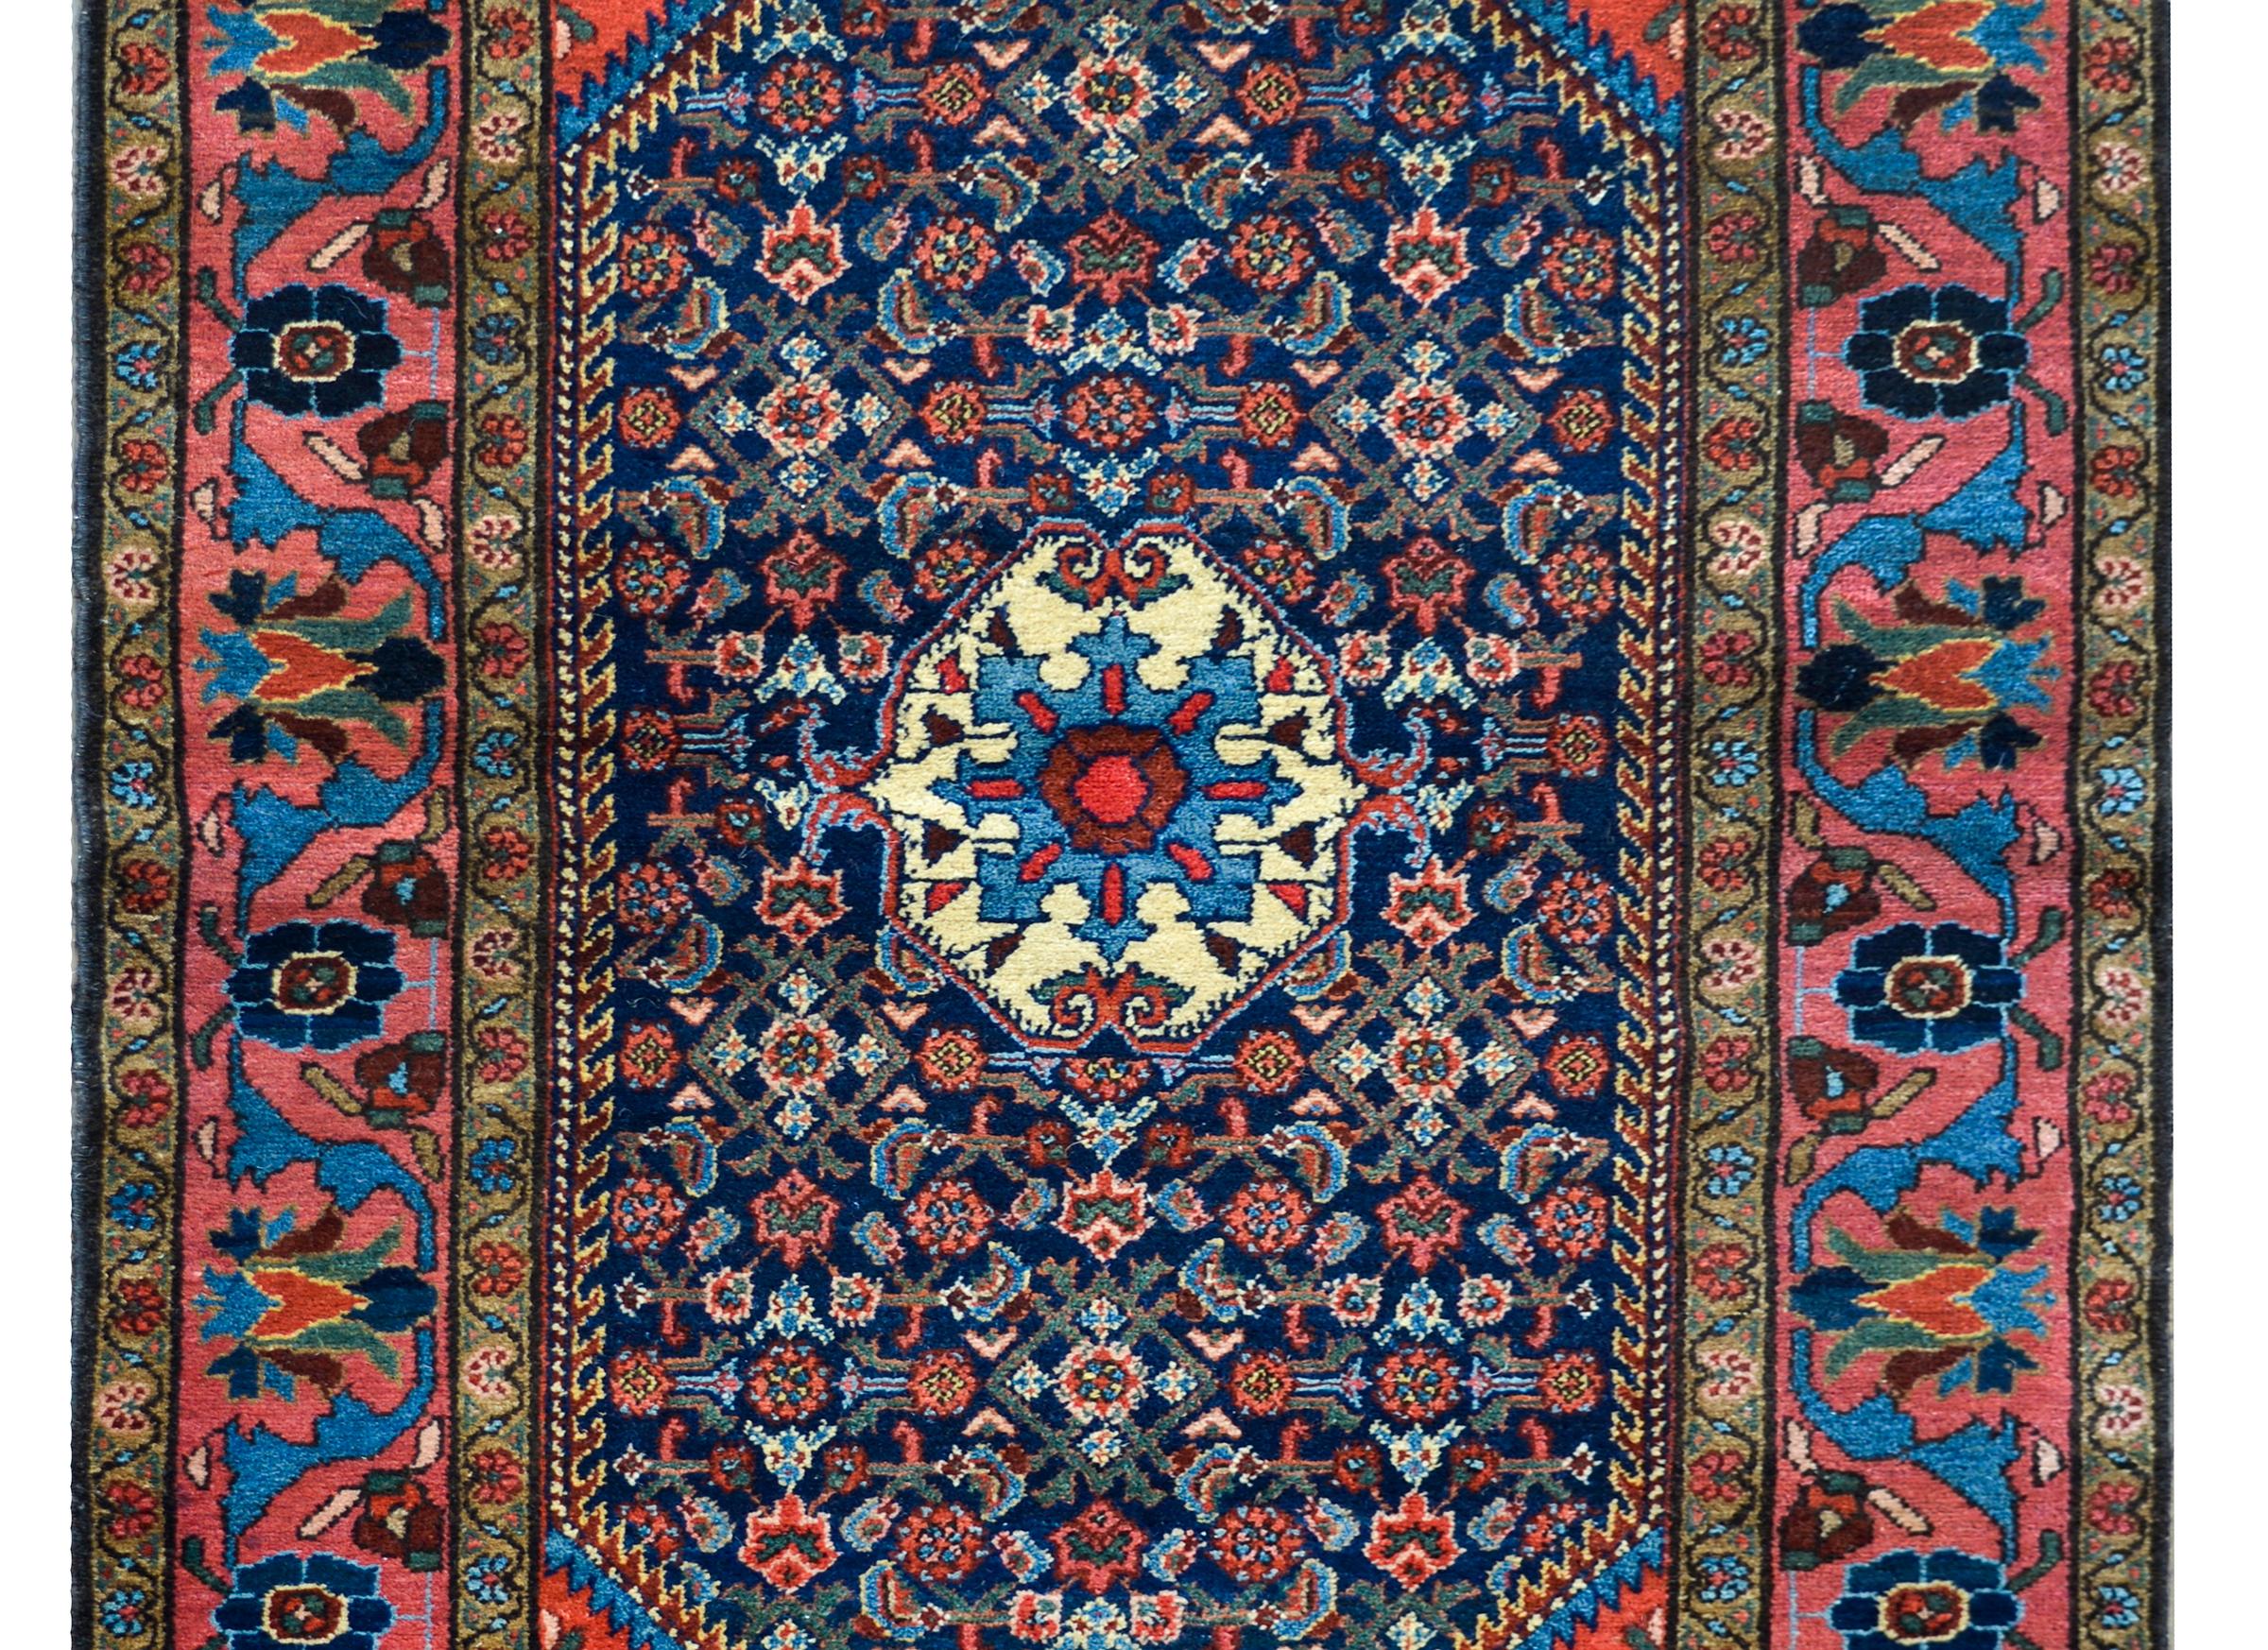 An wonderful early 20th century Persian Malayer Herati rug with a beautiful central stylized floral medallion amidst a field of stylized flowers and leaves woven in crimson, green, cream, and light and dark indigo, against a dark indigo background,